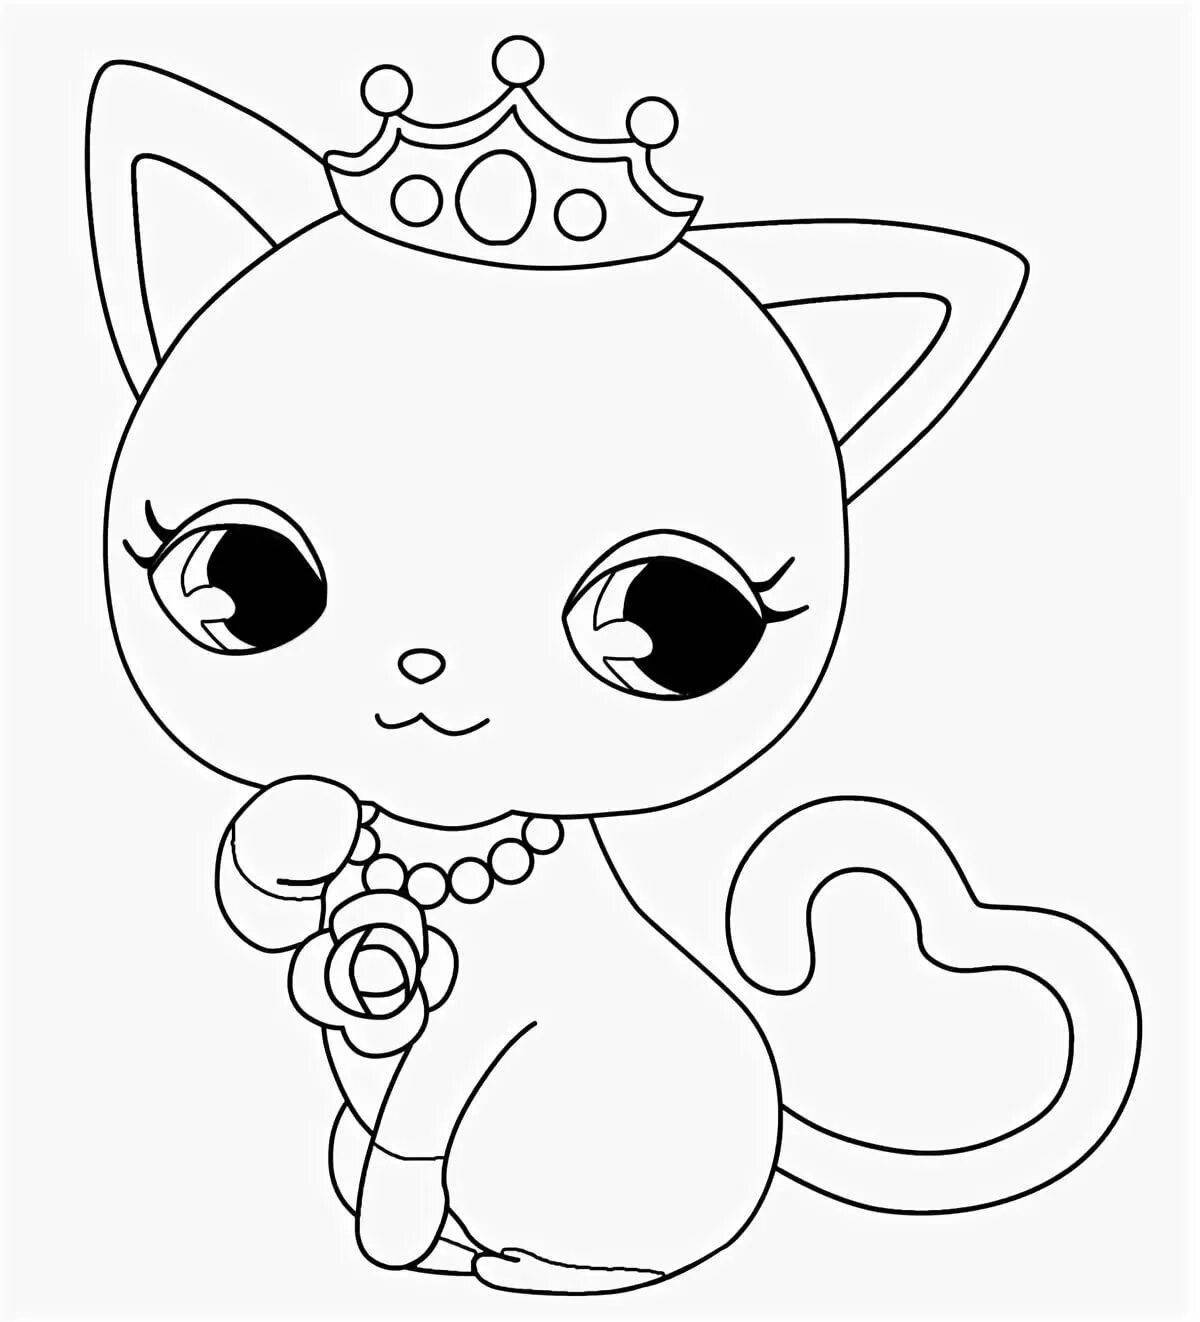 Coloring book fluttering little kitty